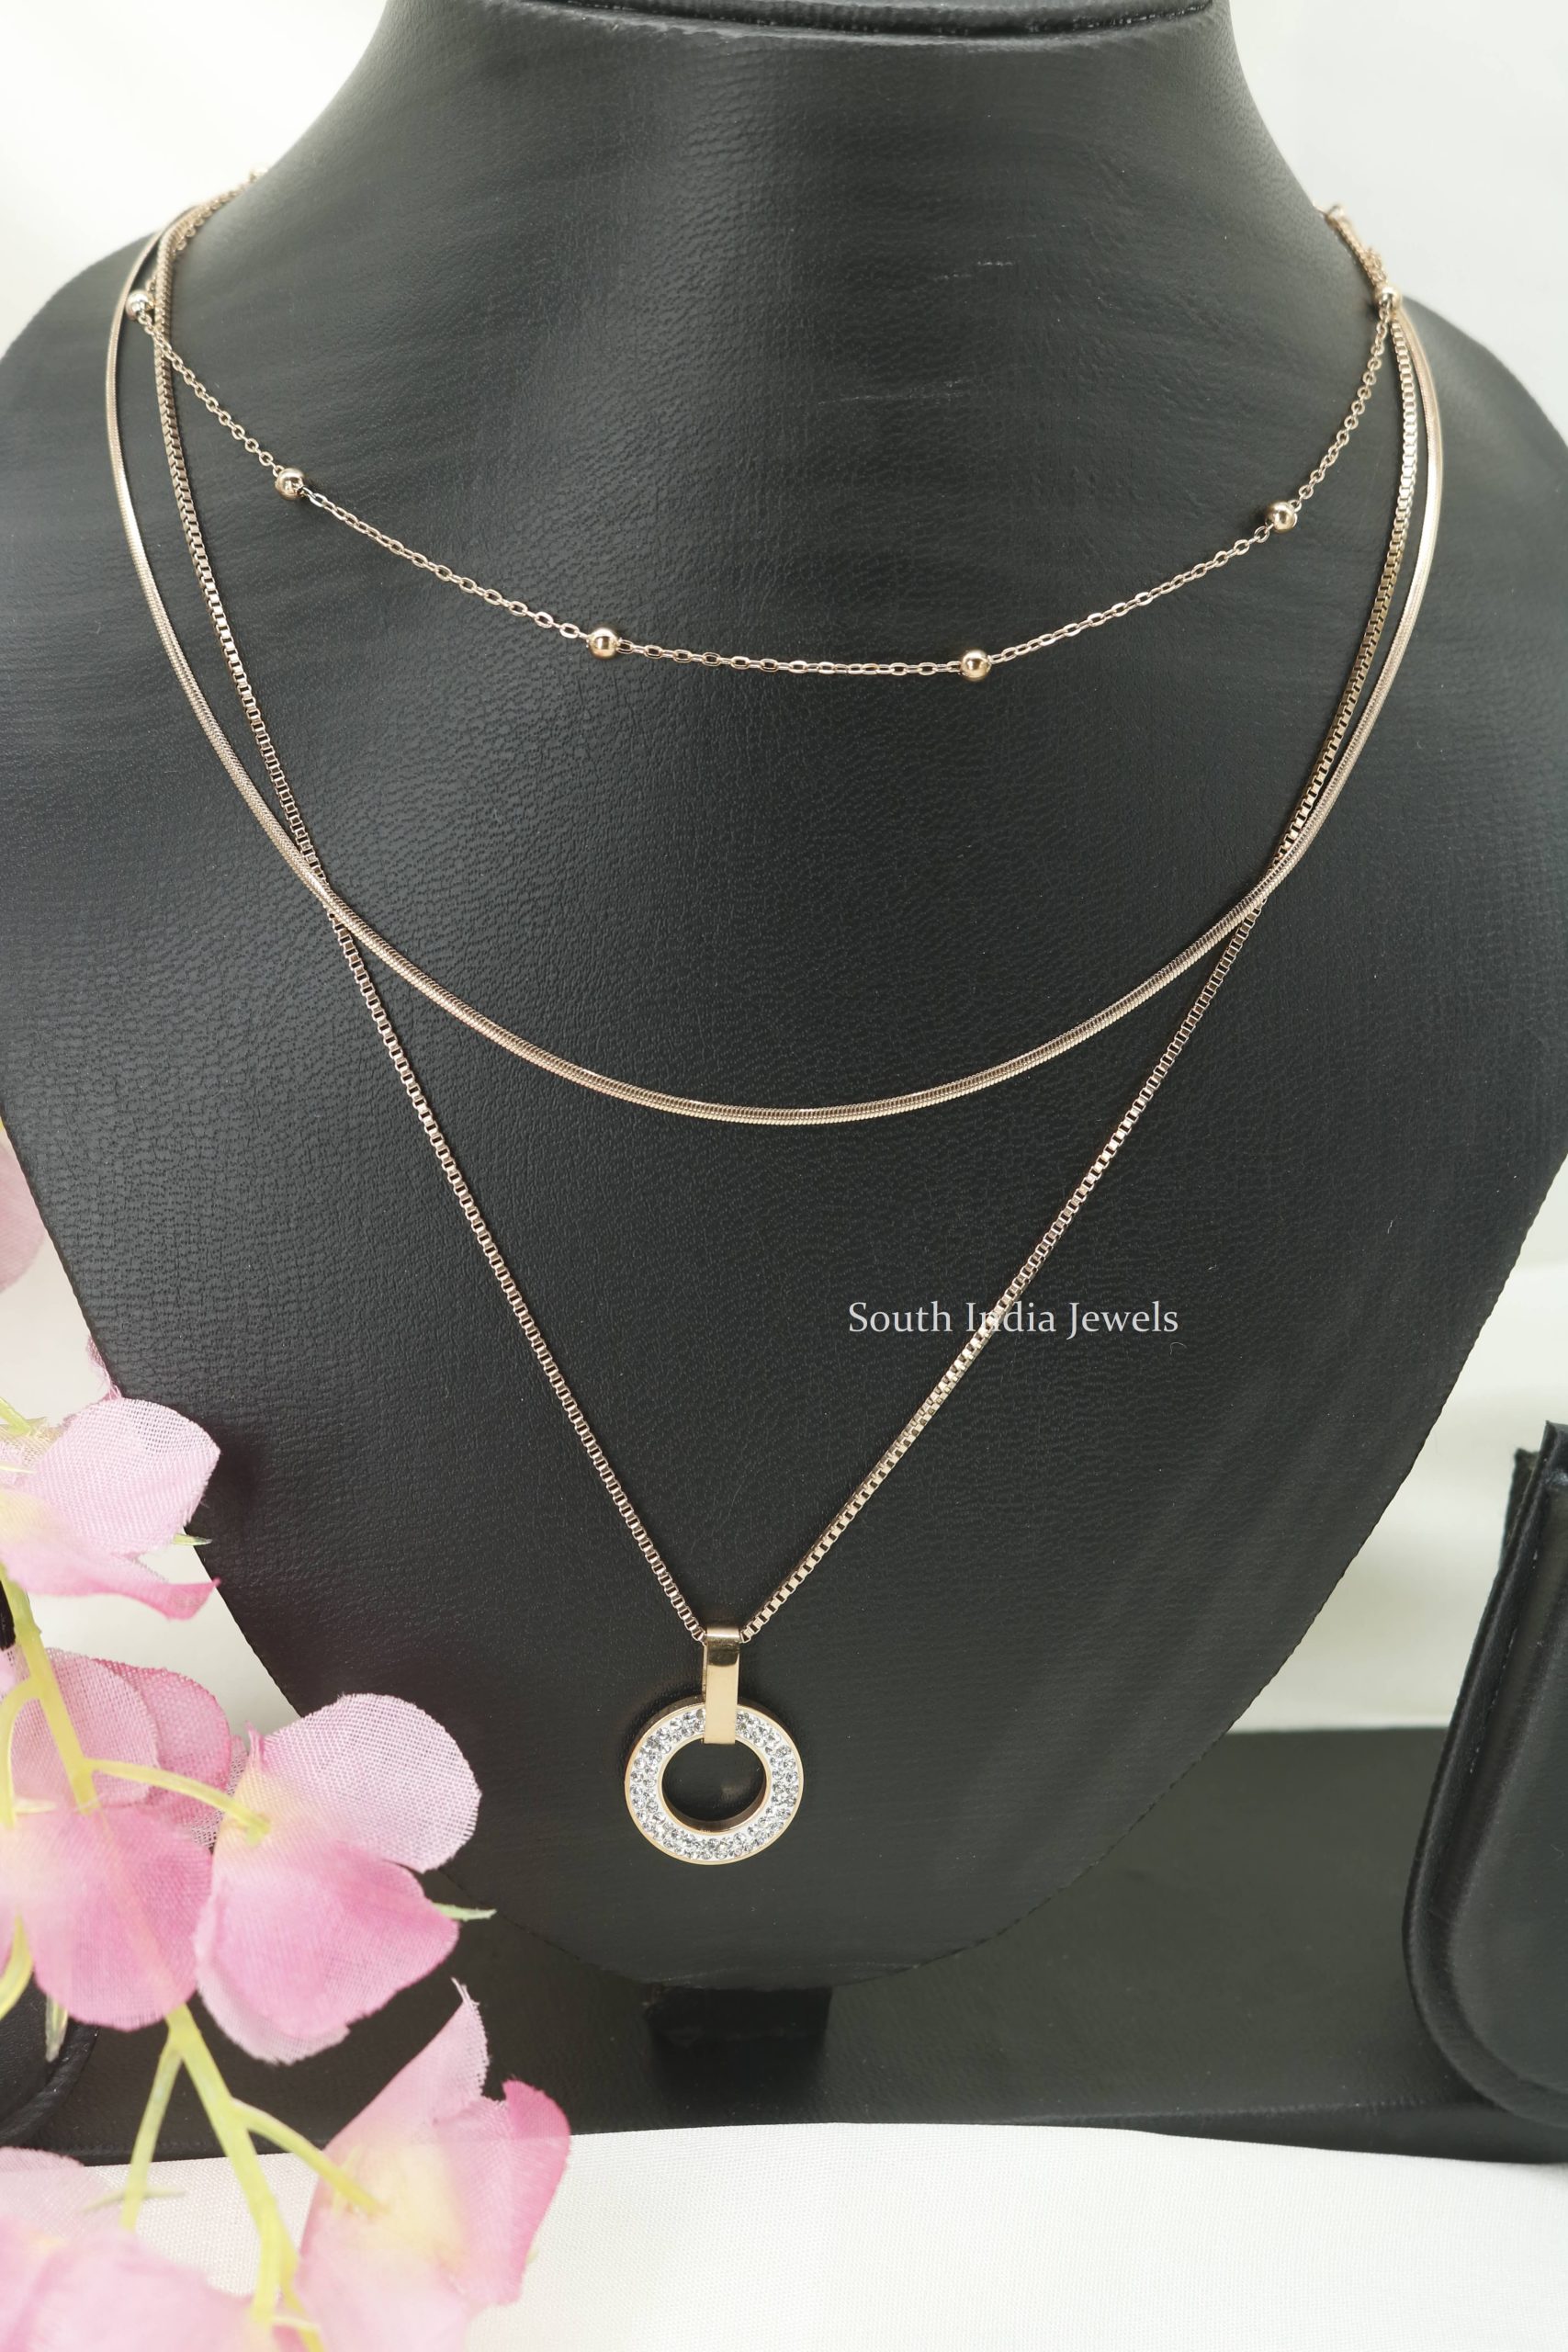 Three Layered Rose Gold Pendent Chain